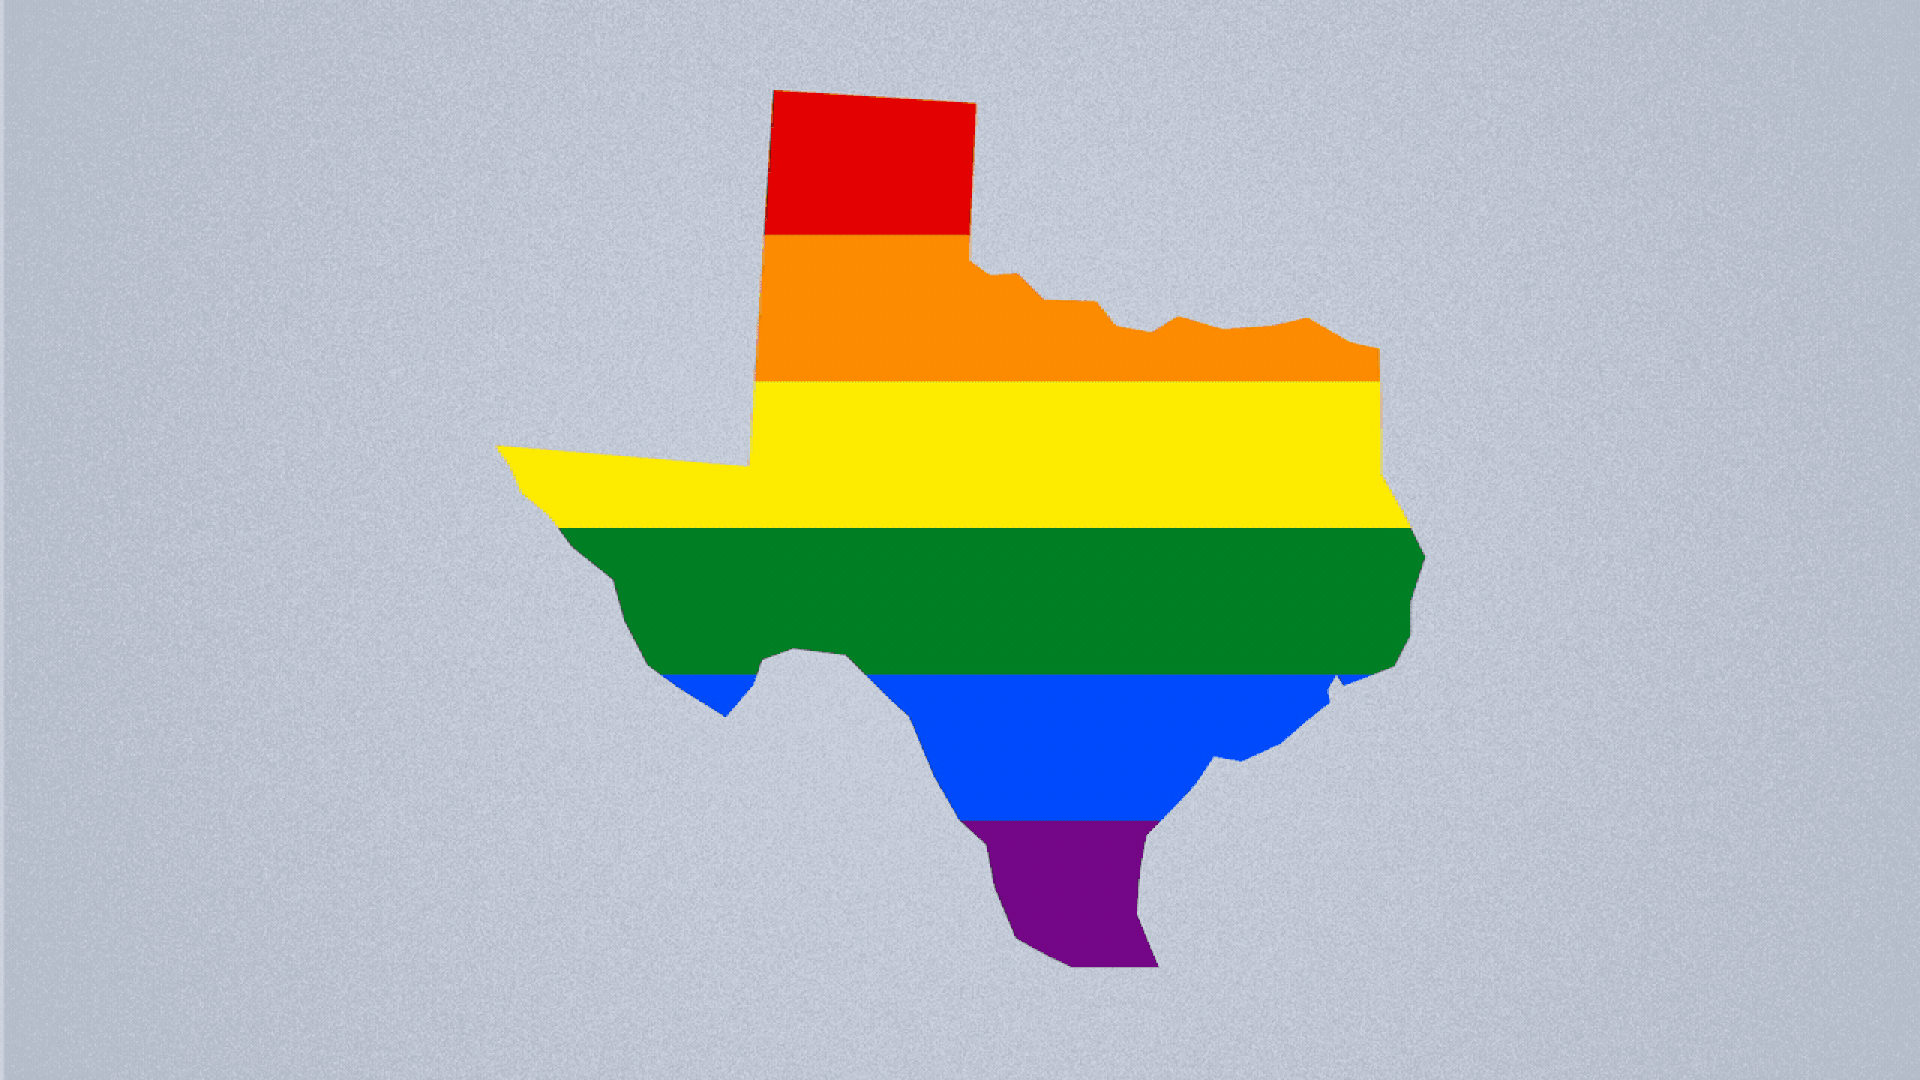 Illustration of the state of Texas with the LGBTQ Pride Flag colors in it, and black blinds covering them.